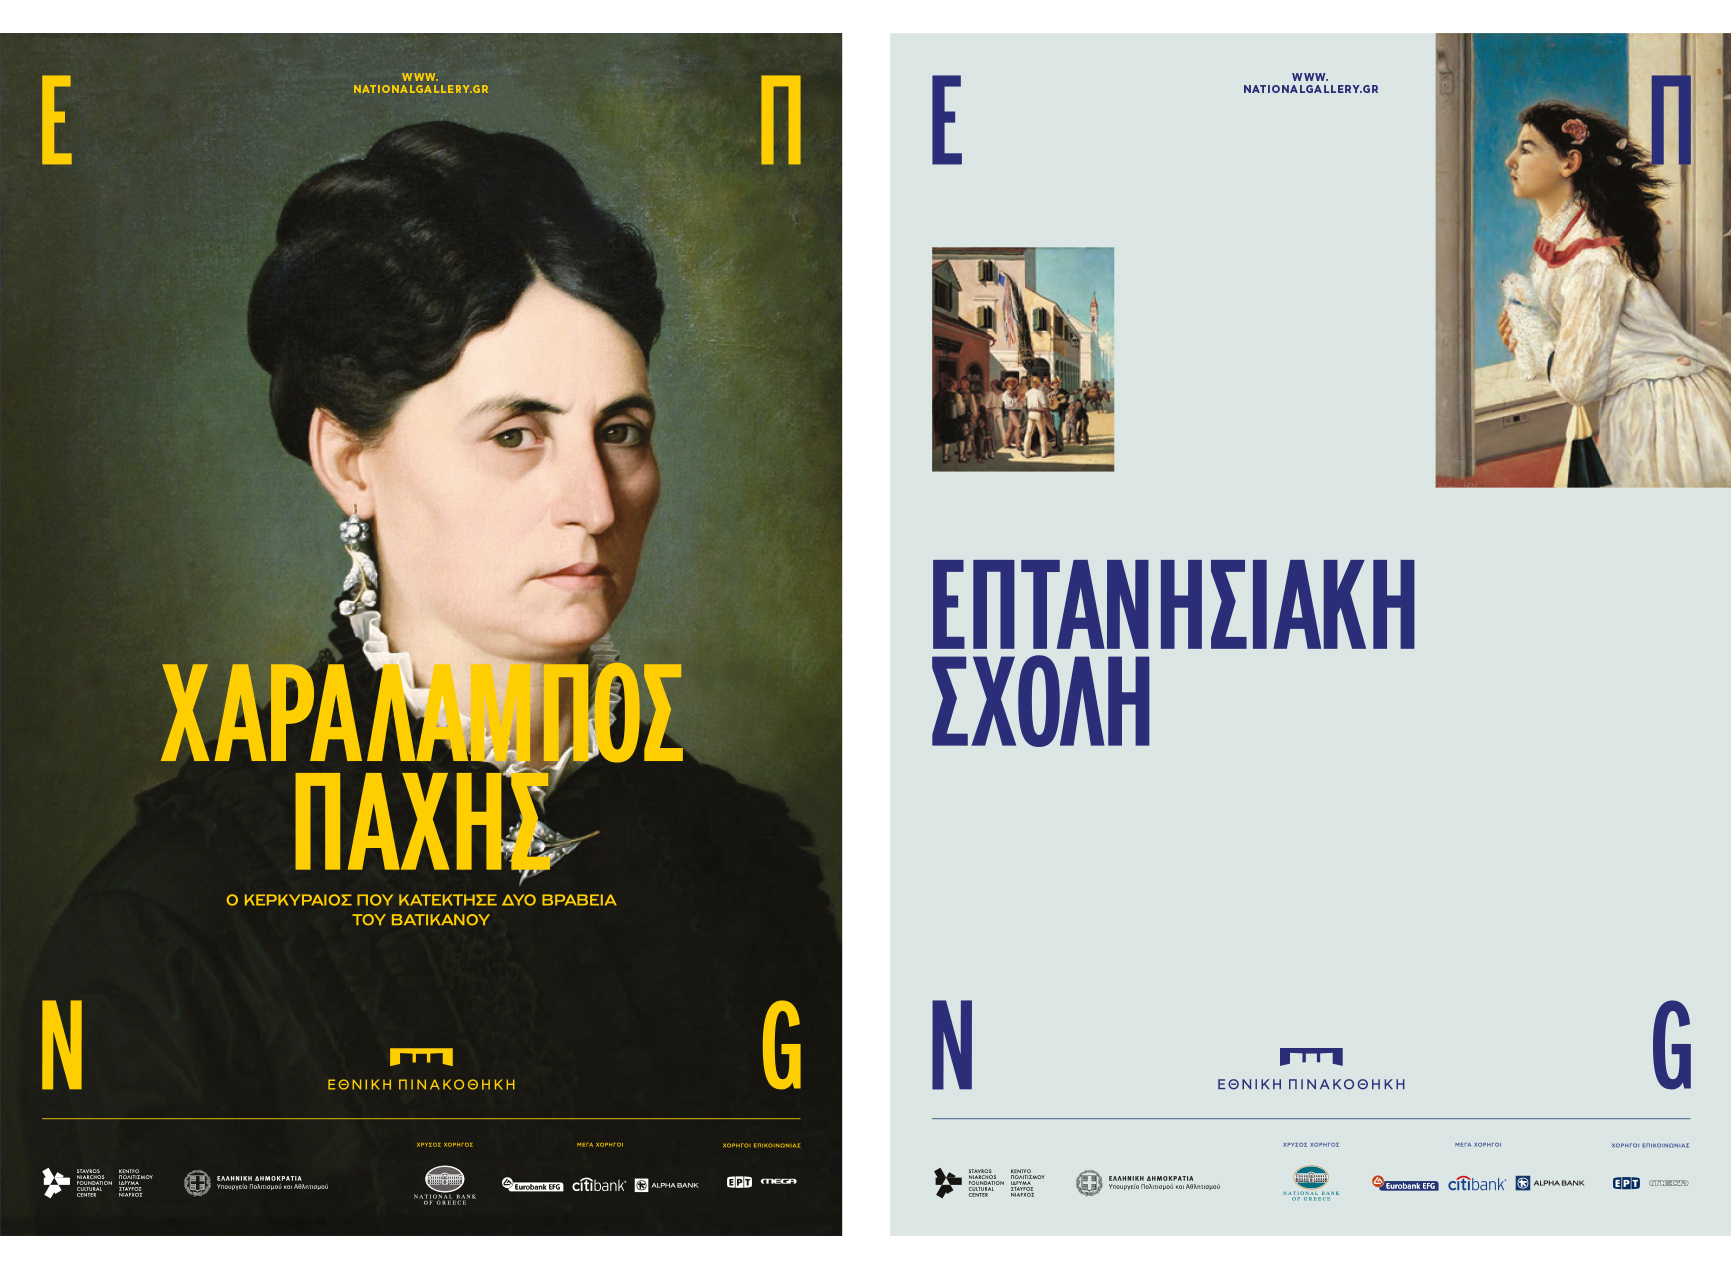 national gallery branding poster layout kommigraphics